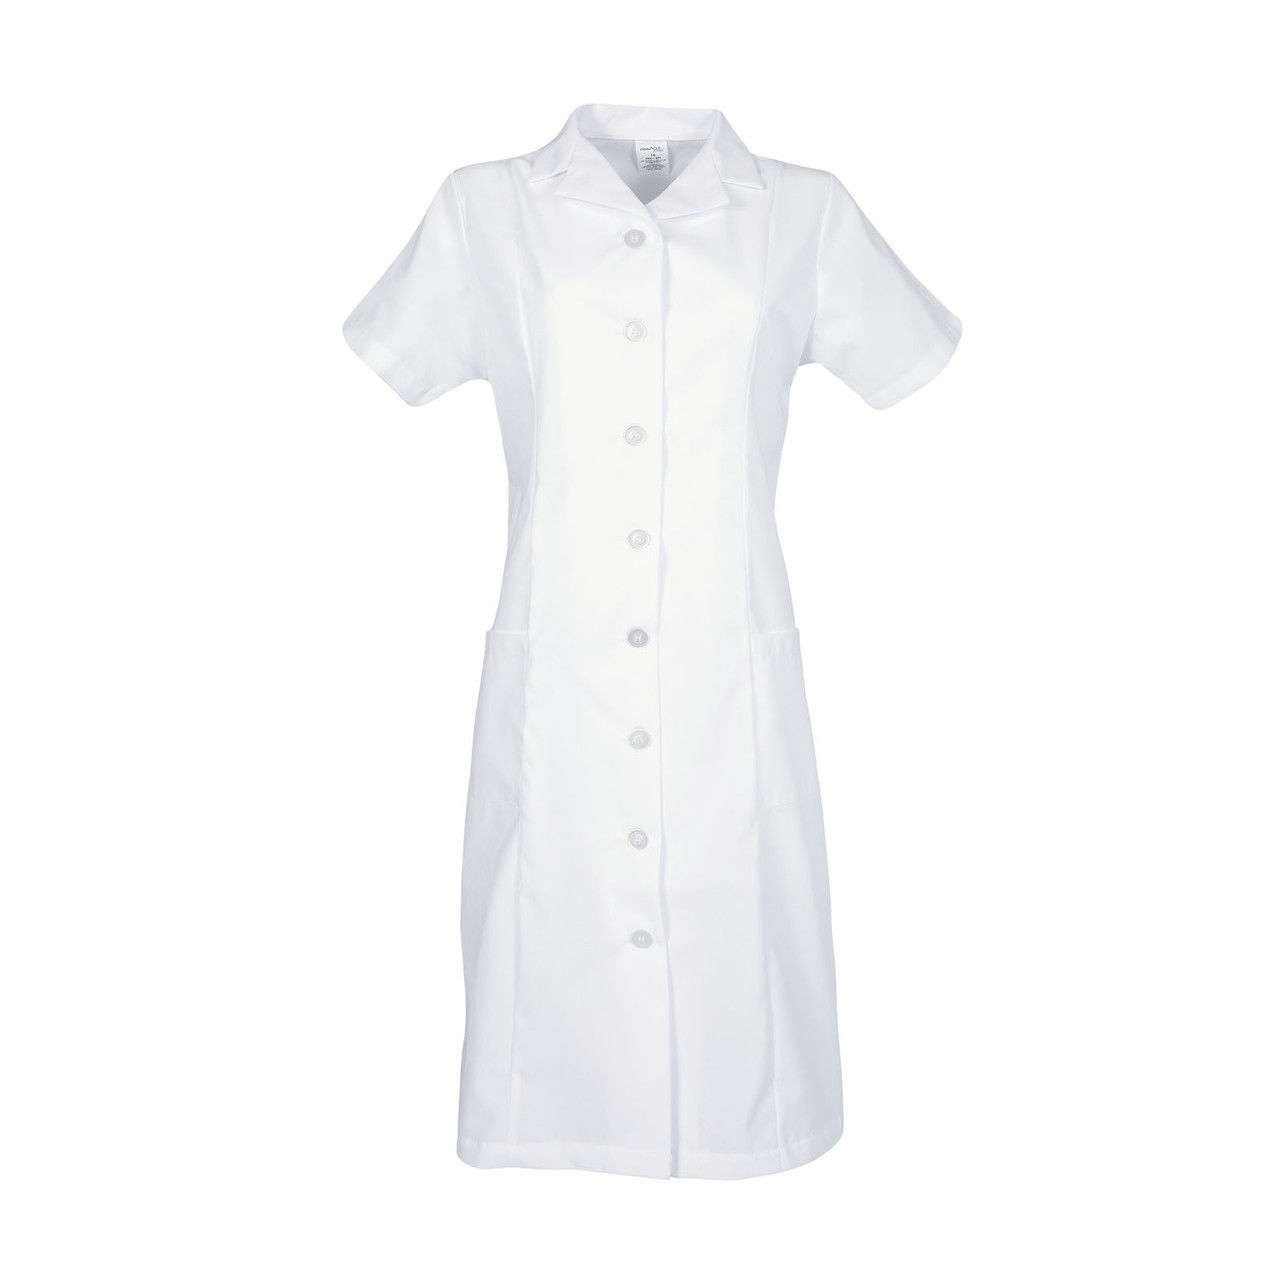 Does the white uniform dress have any special fabric features?